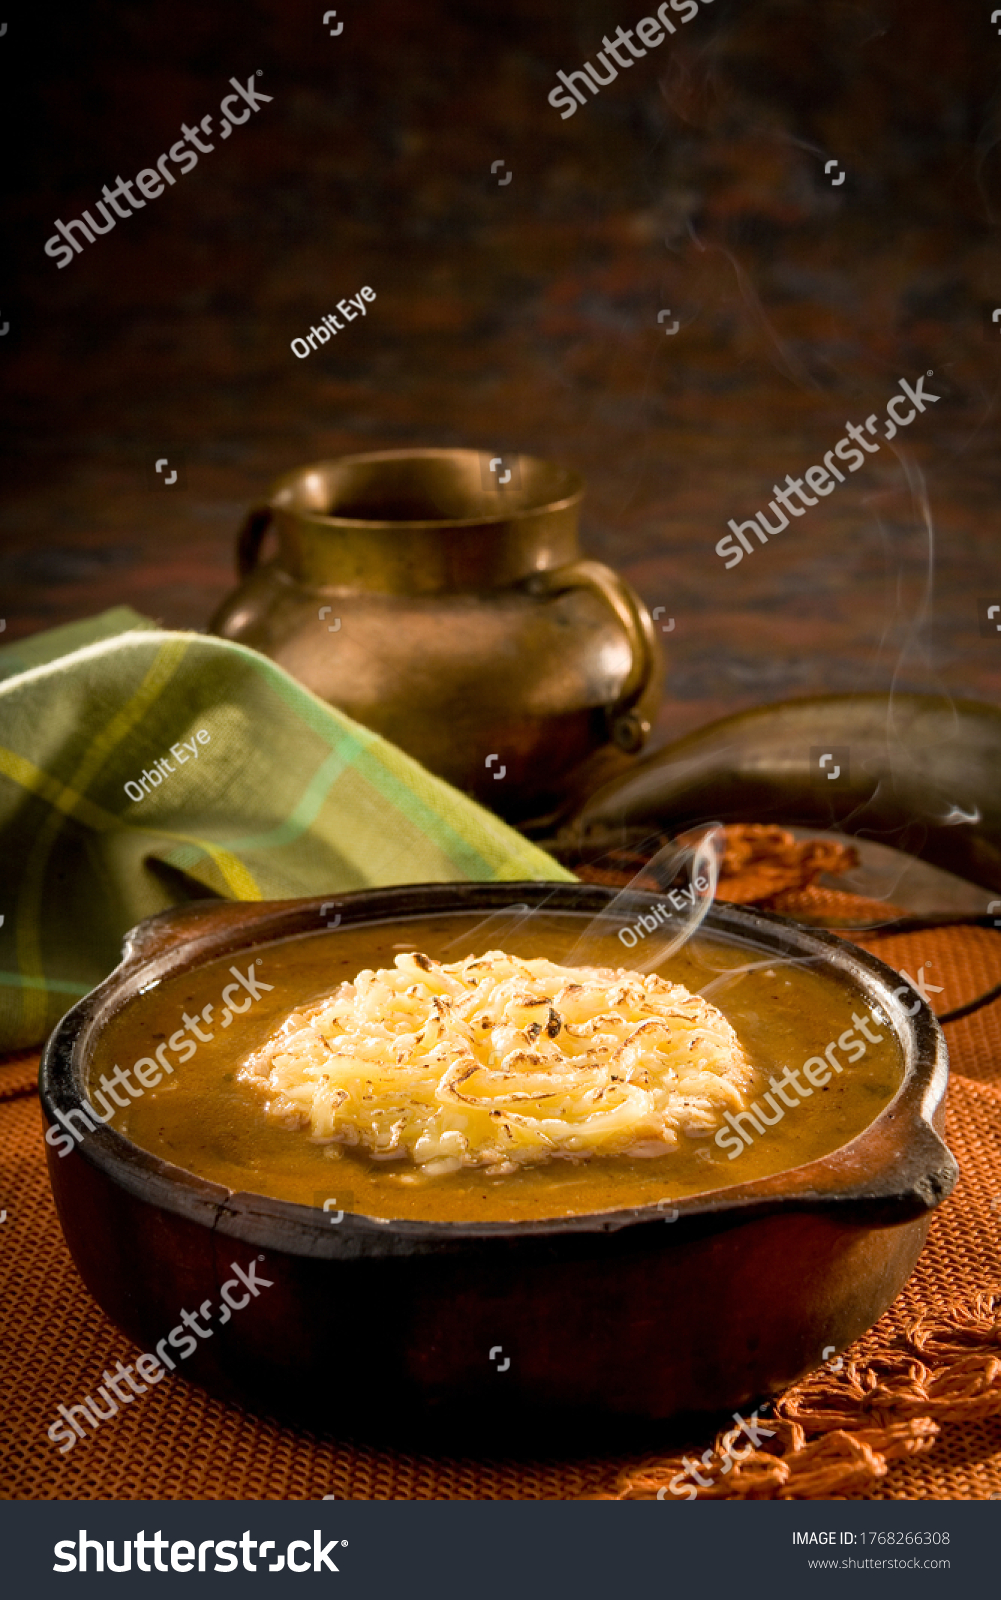 Bowl of onion soup with a napkin and a bowl in the background. Traditional Ecuadorian soup in a cozy and warm setup. #1768266308